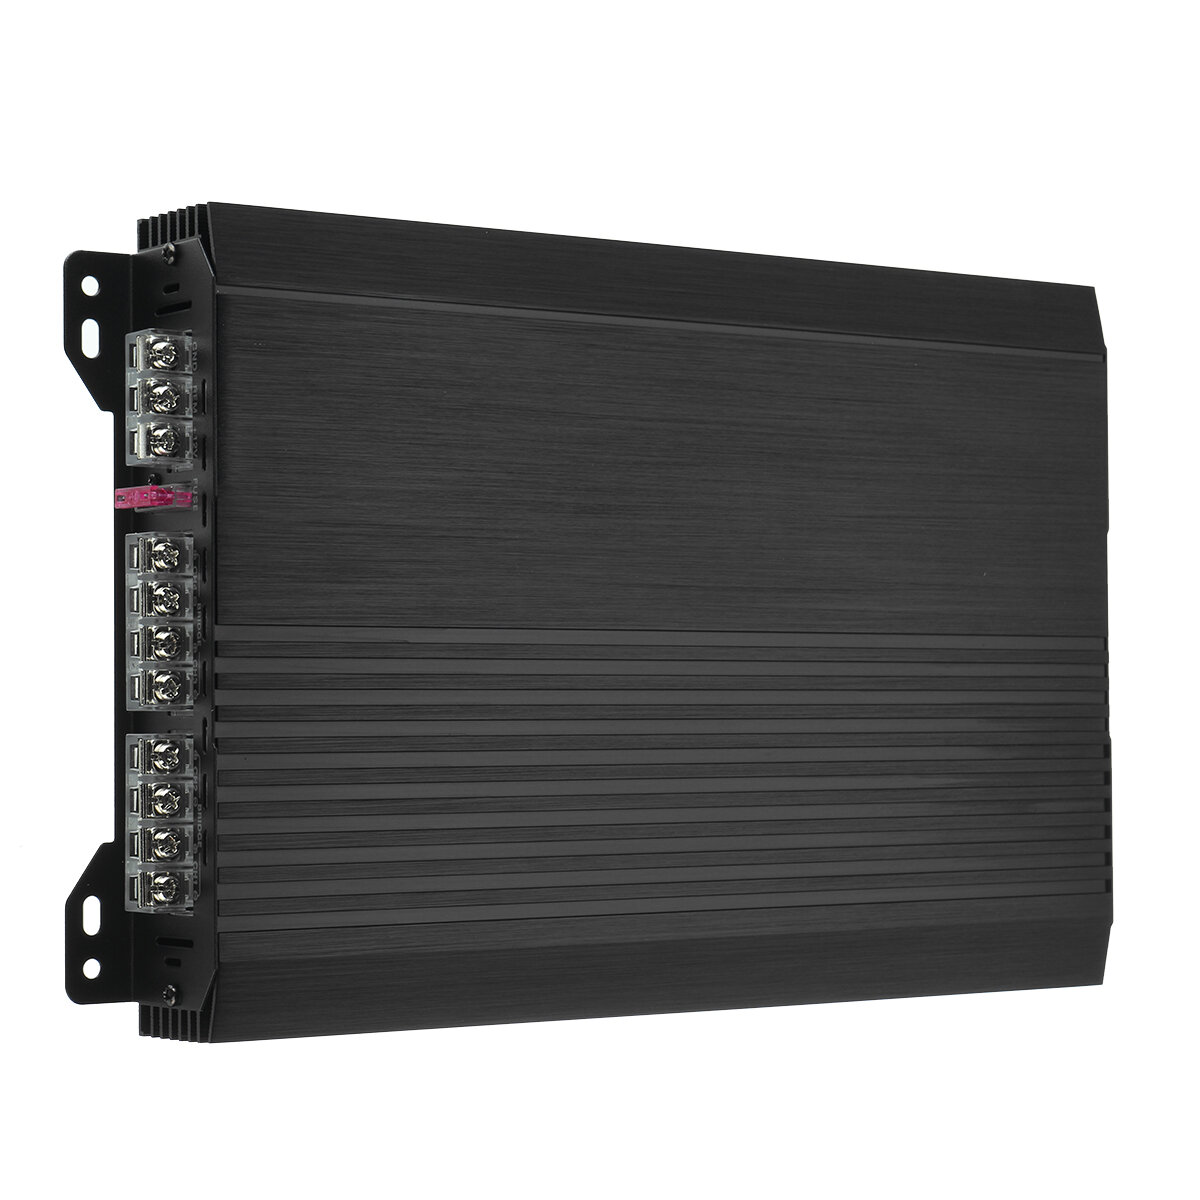 Image of 12V 6800W Car Amplifier Multichannel Powerful Audio Subwoofer Aluminum Alloy Vehicle Power Stereo Amp Car Sound Amplifie